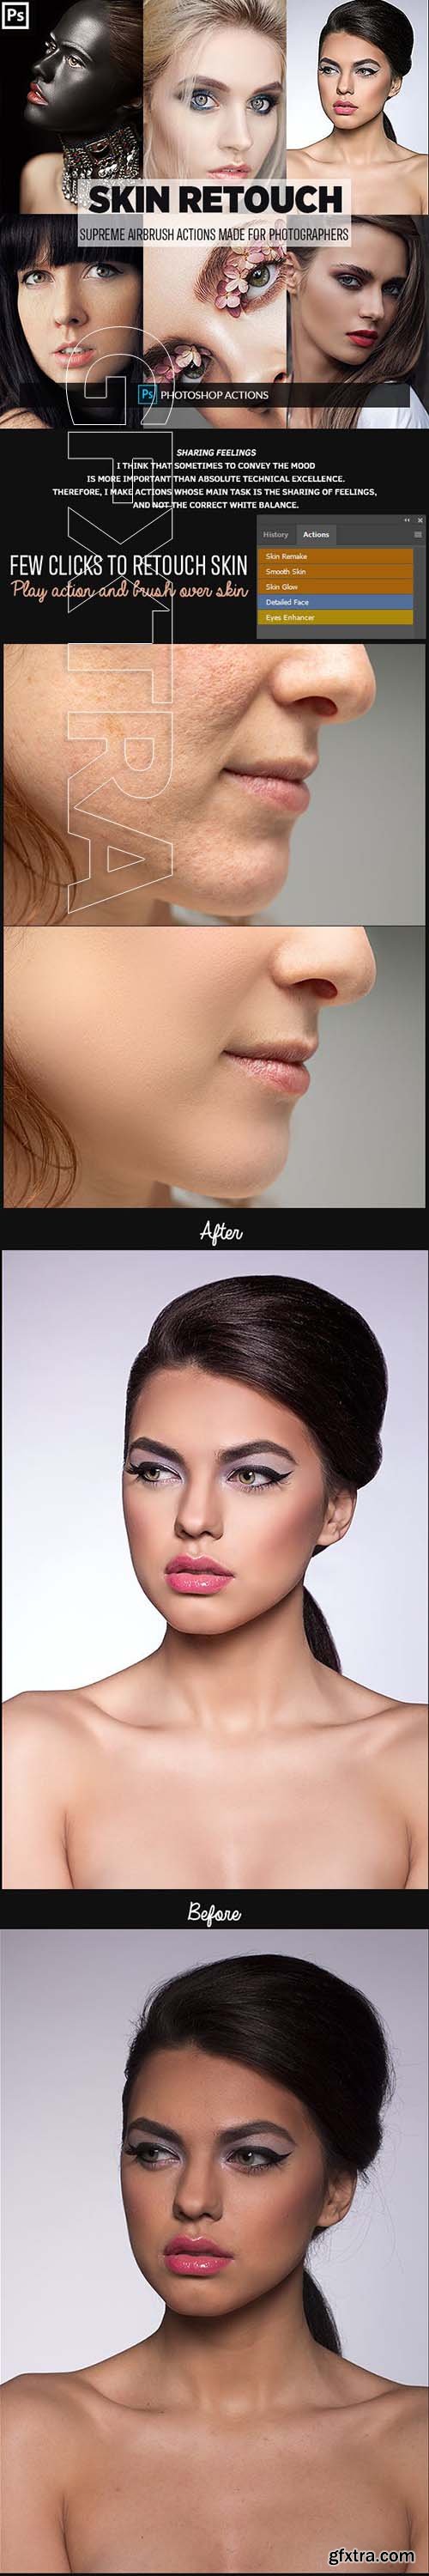 GraphicRiver - Easy Skin Retouch Photoshop Actions 23160423